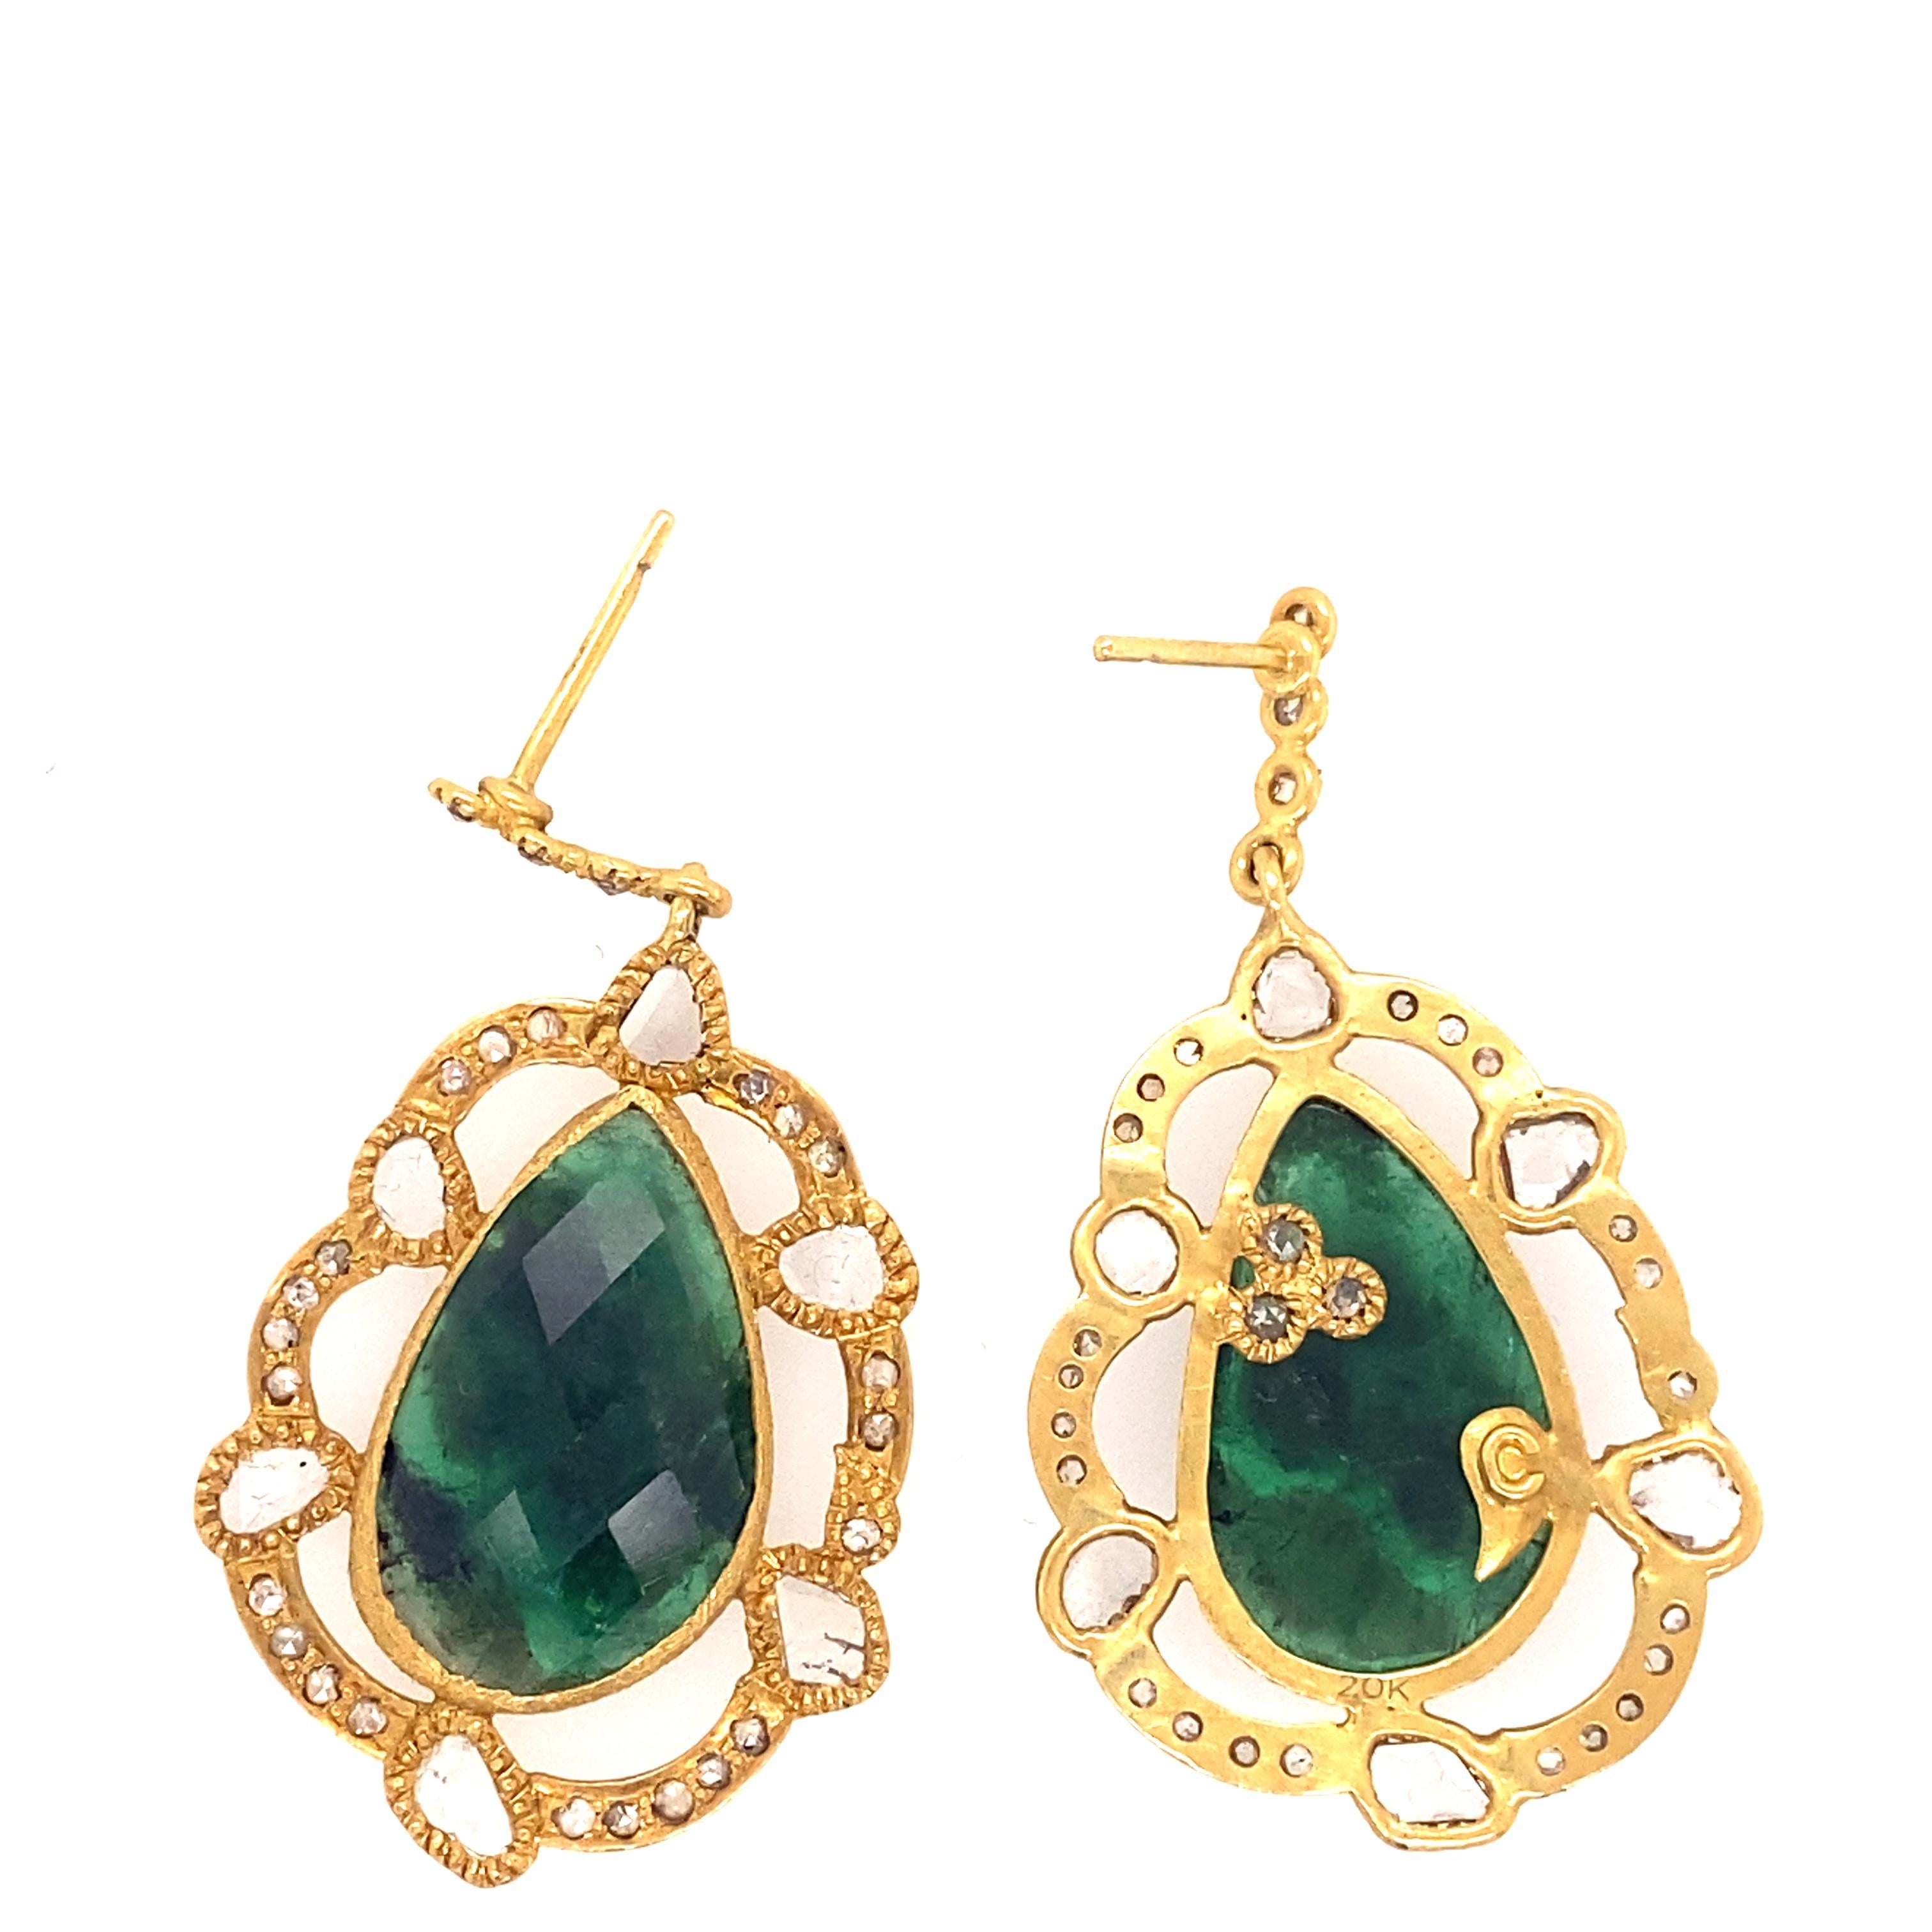 Affinity Emerald Slice Earrings With 13.06 Carat Emeralds and 1.48 Carat Diamonds. These Emeralds and Diamonds Are Set In A Timeless Design And 1.5 Inches In Length.